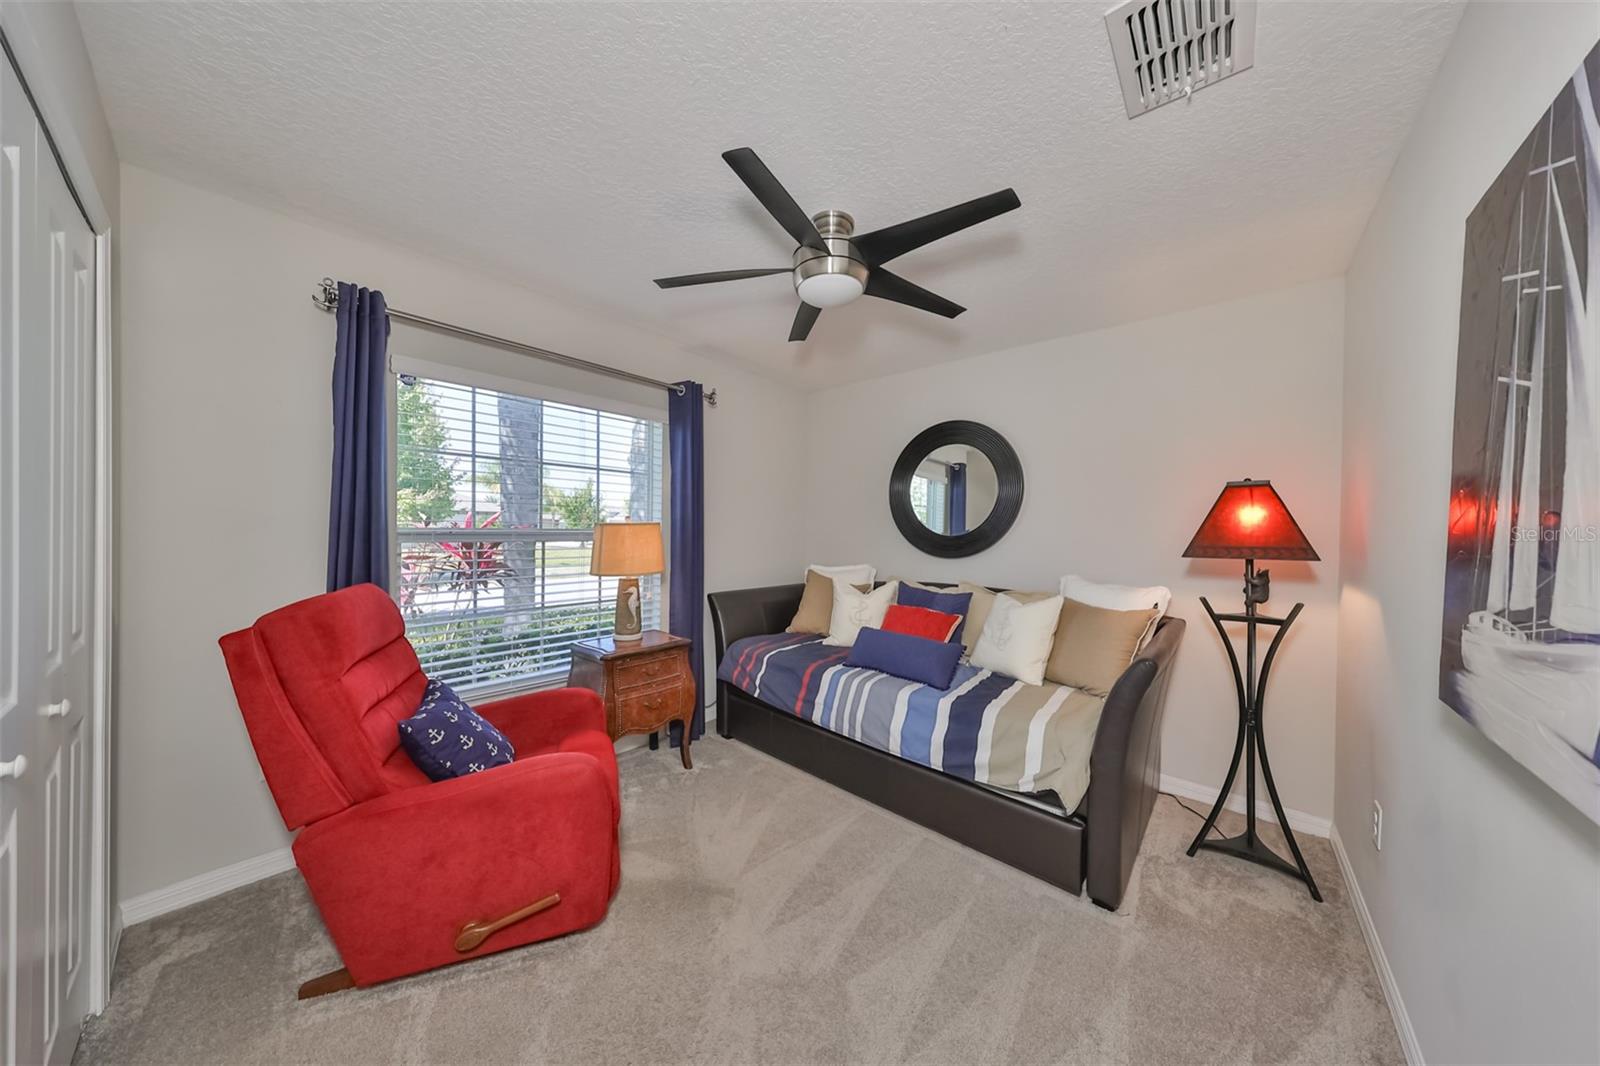 Third bedroom is also good size with a large window for sunshine and a custom fan.